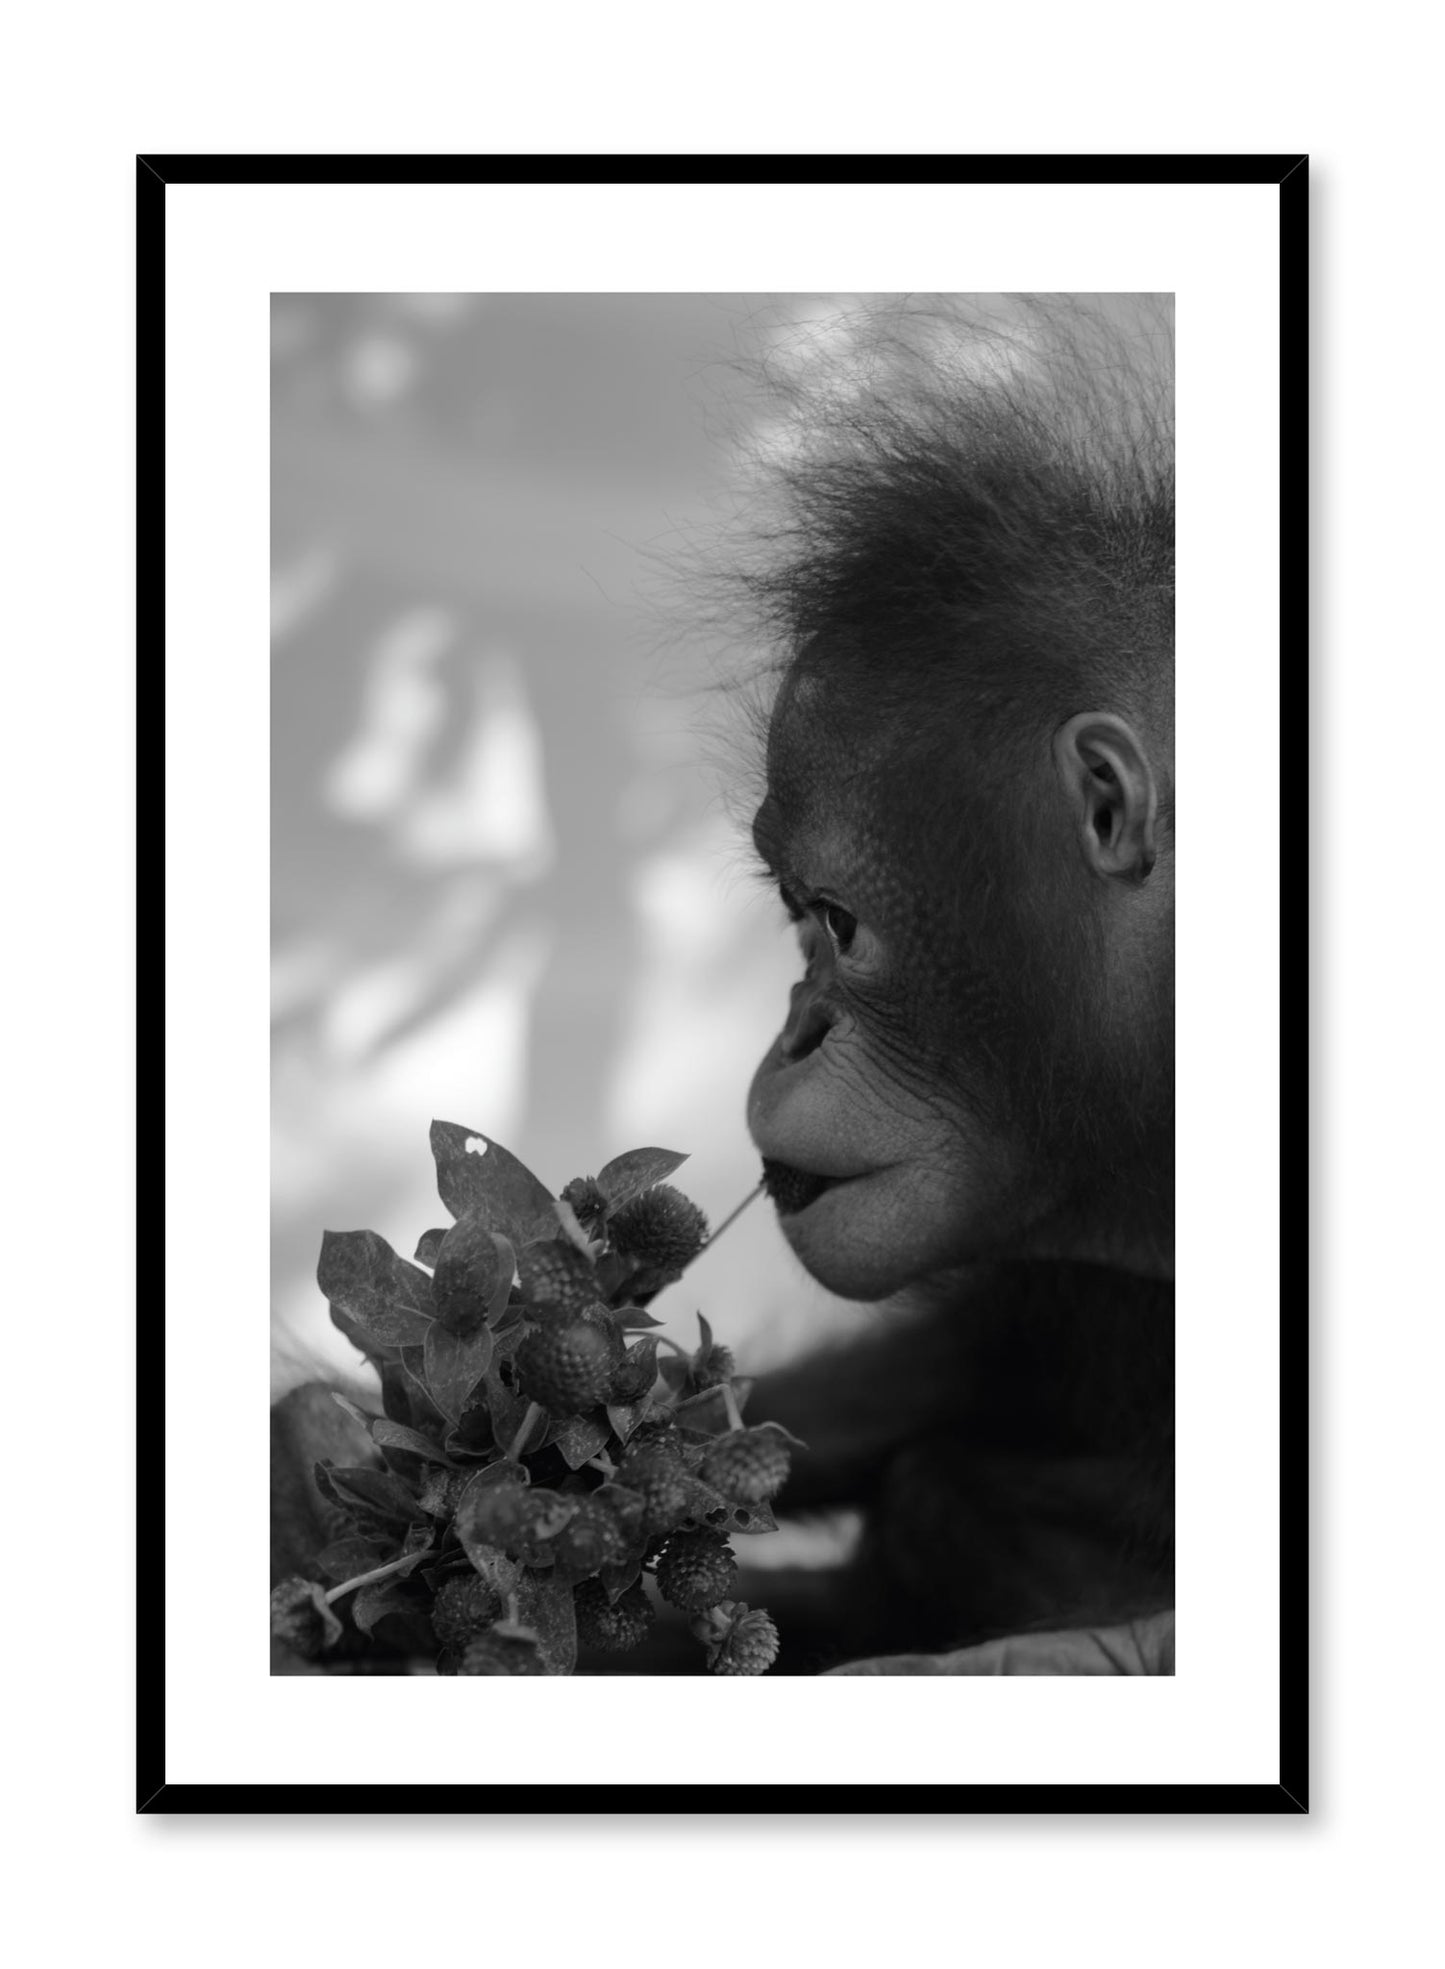 Minimalist design photography poster of black and white Hungry Monkey by Love Warriors Creative Studio - Buy at Opposite Wall